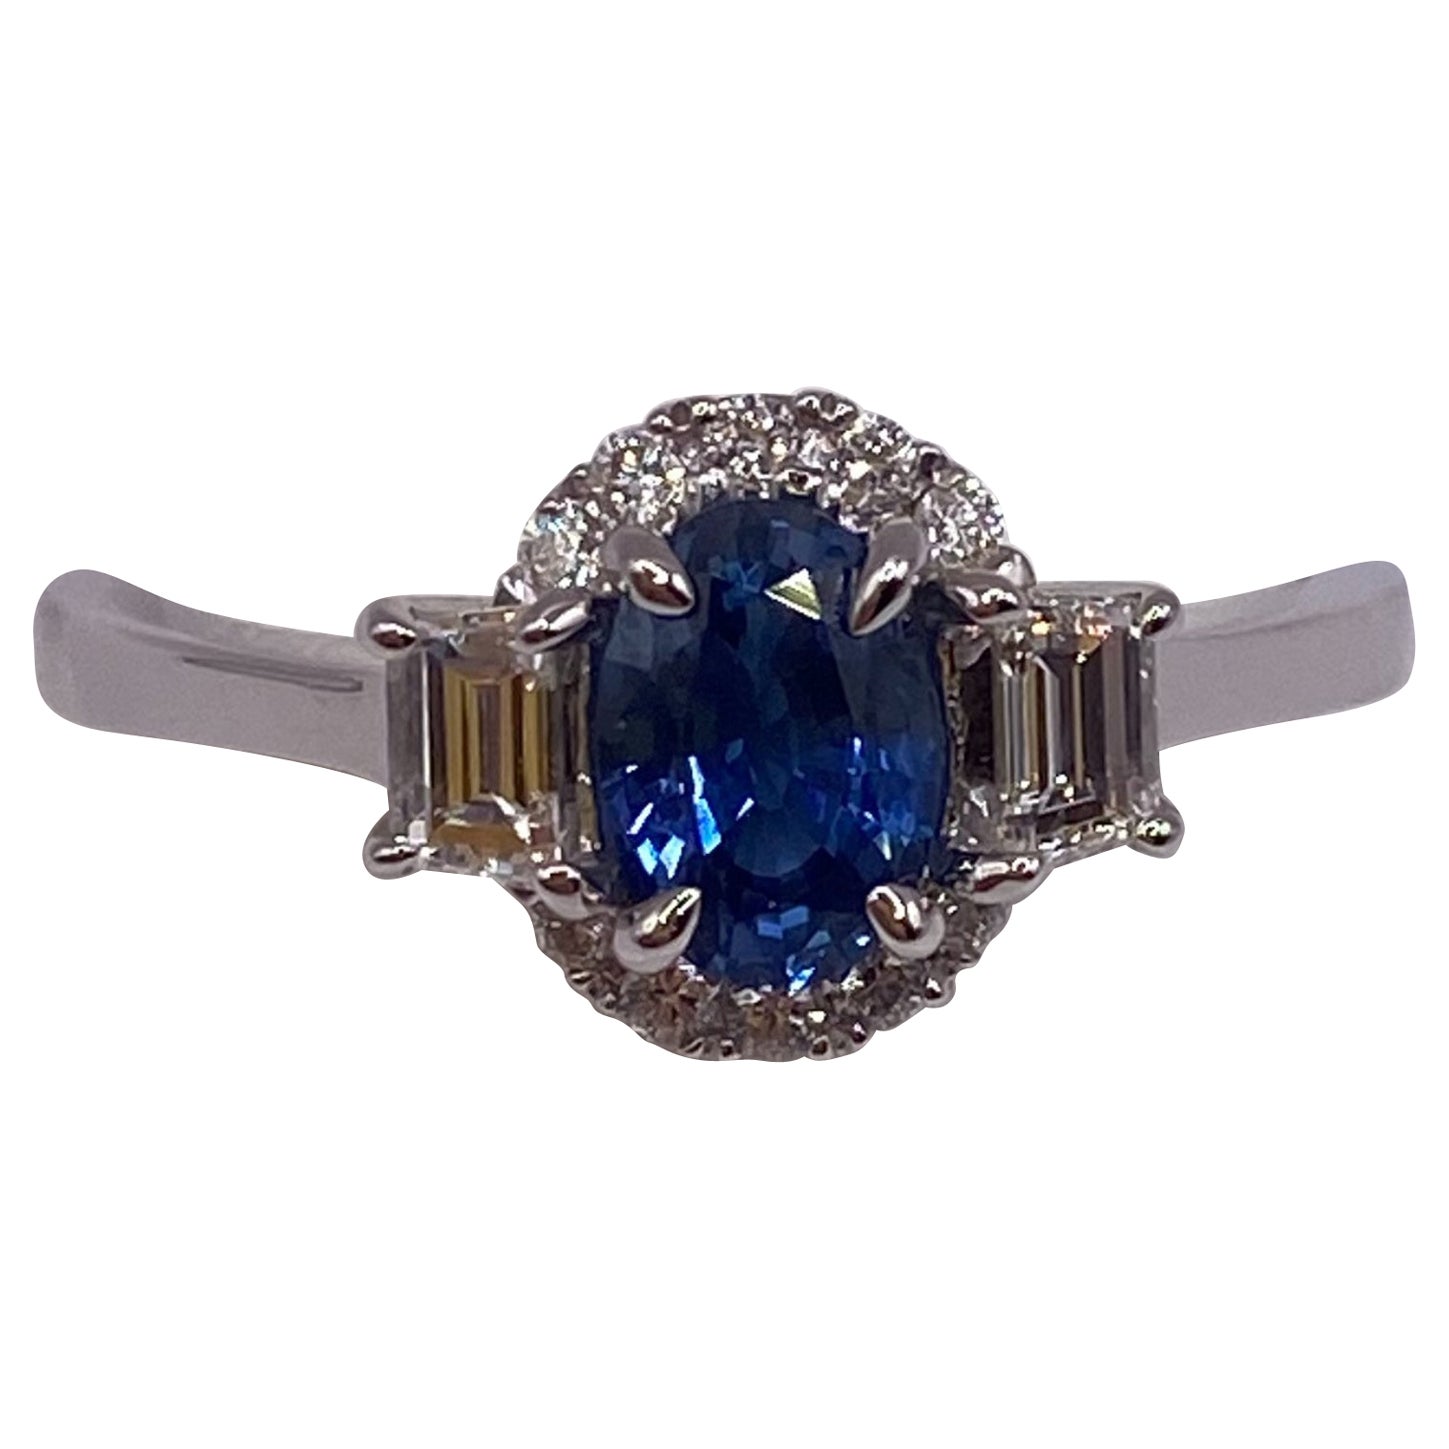 1.07ctw Oval Sapphire & Trapezoid Diamond Ring in 18KT White Gold